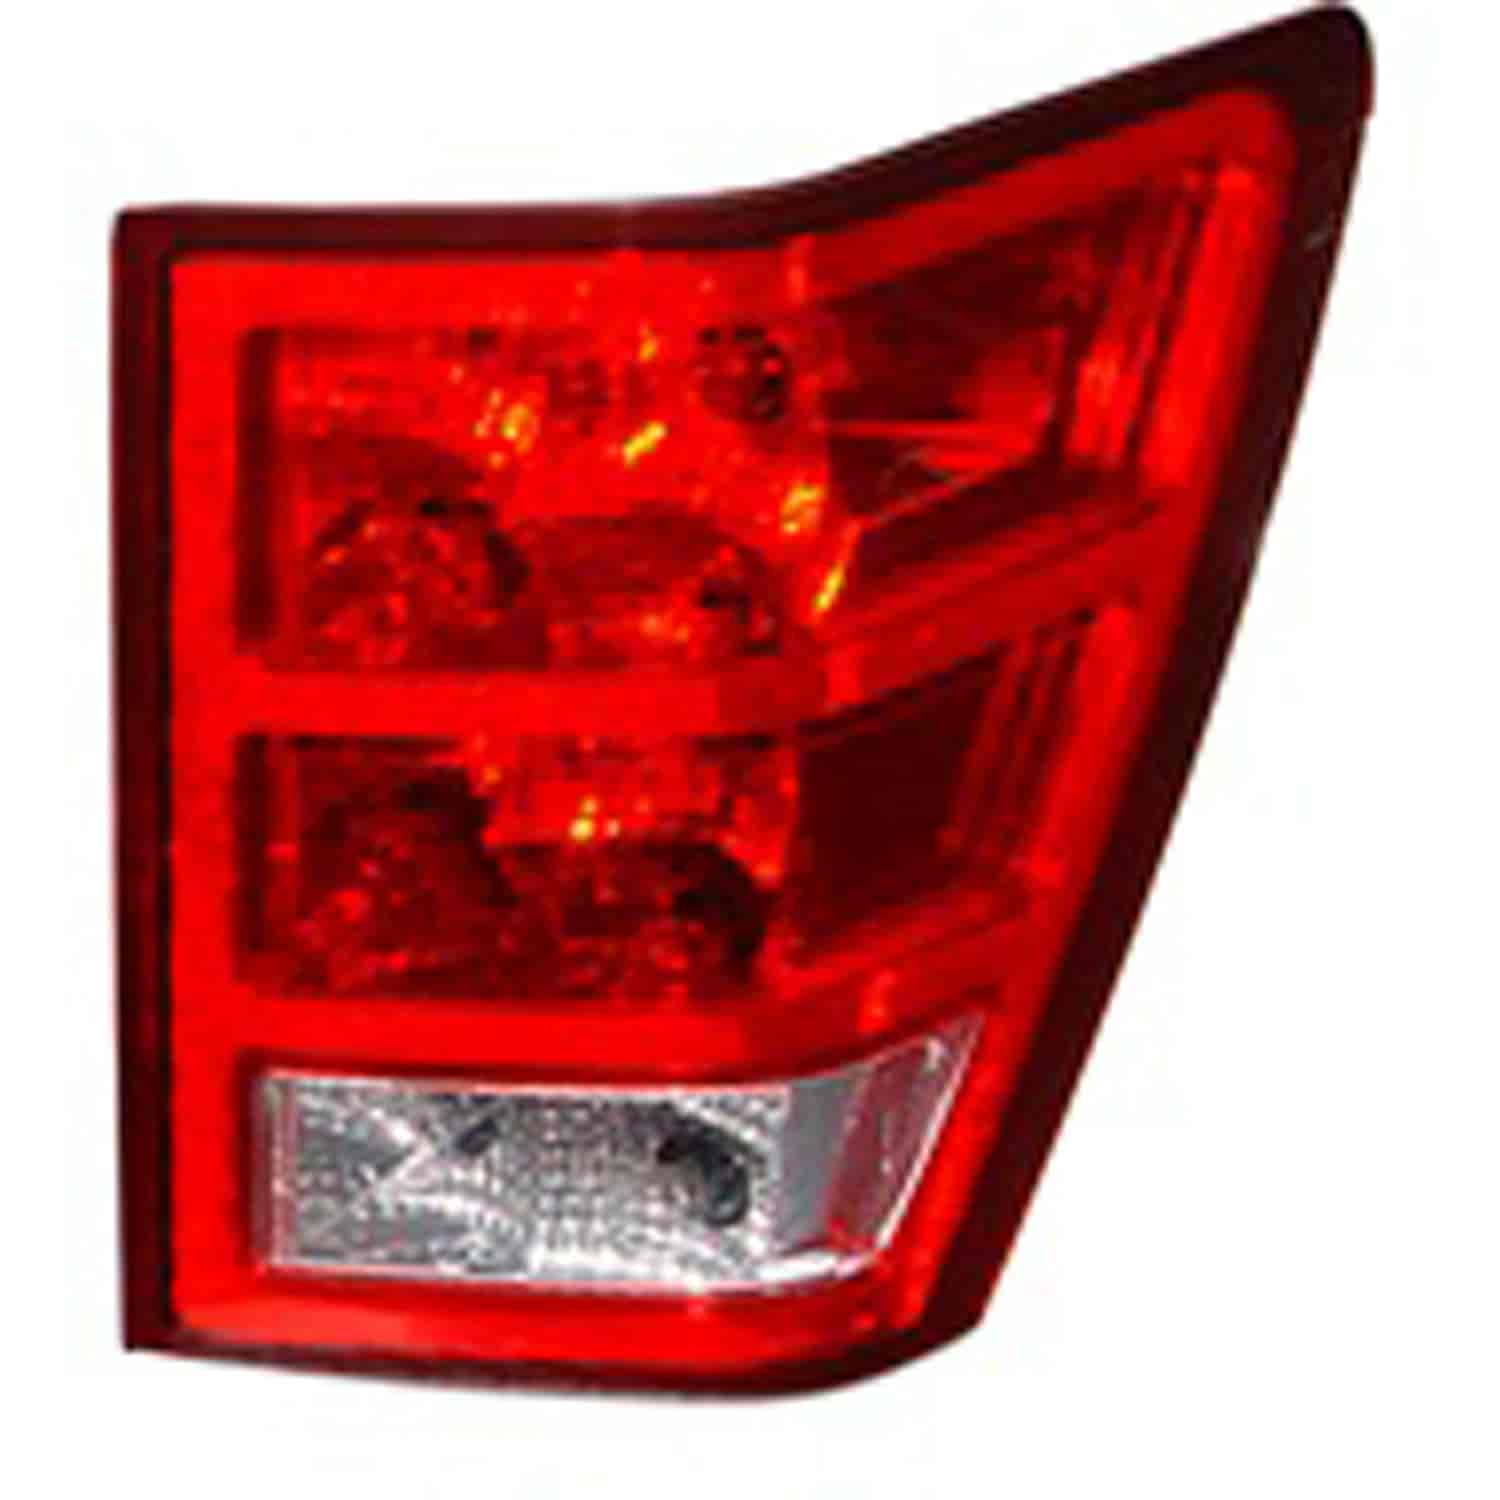 Replacement tail light assembly from Omix-ADA, Fits right side of 07-10 Jeep Grand Cherokee WK